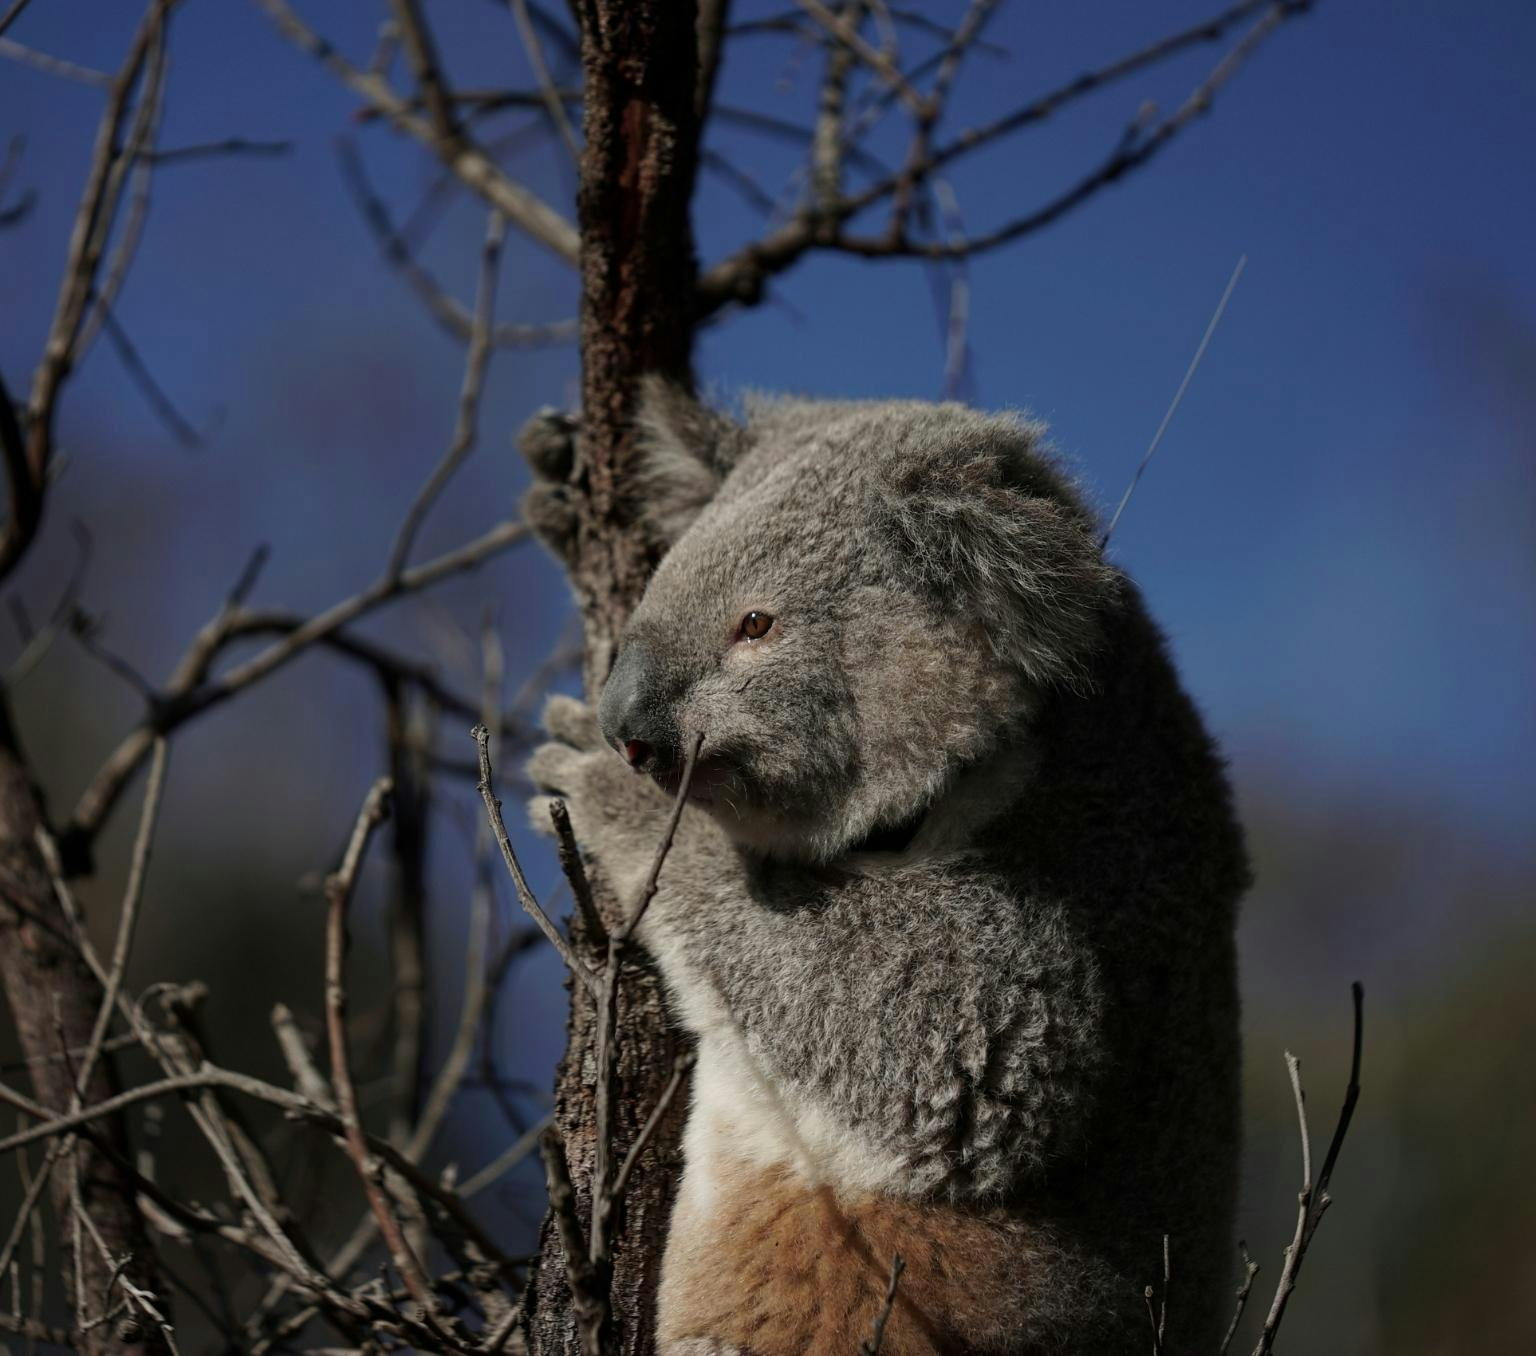 A koala clings to a tree in a forest.